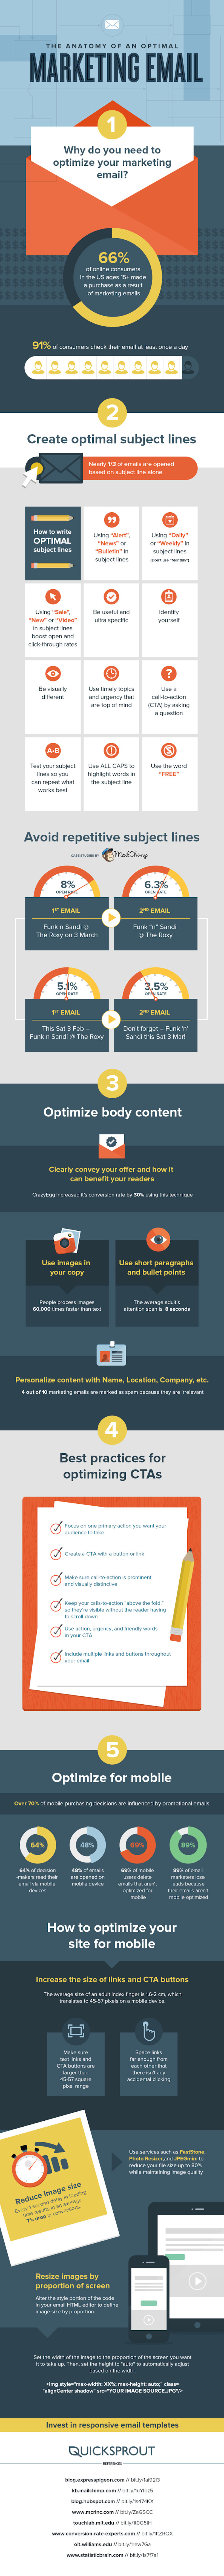 quick sprout email infographic